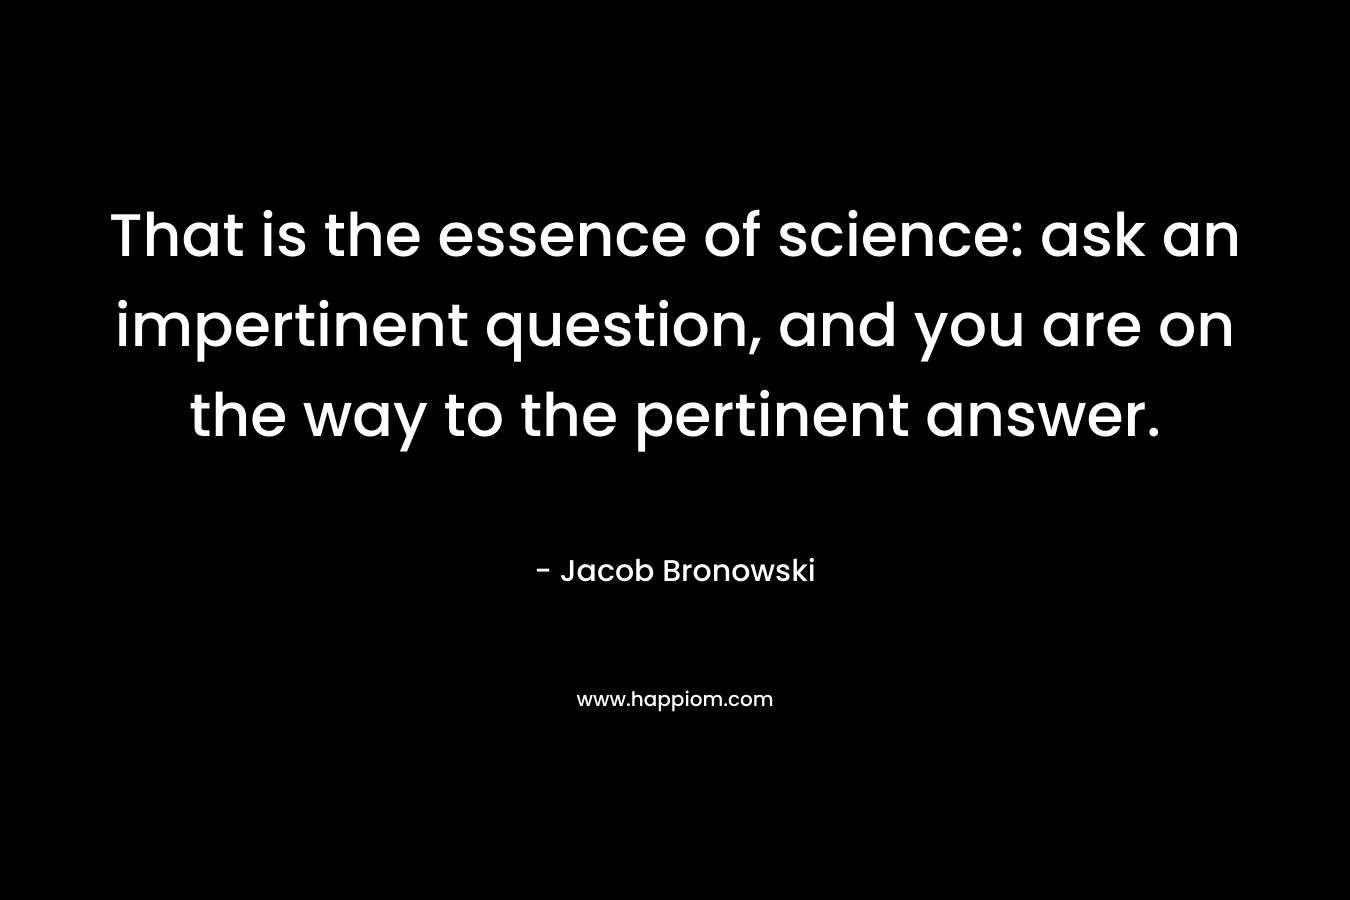 That is the essence of science: ask an impertinent question, and you are on the way to the pertinent answer.